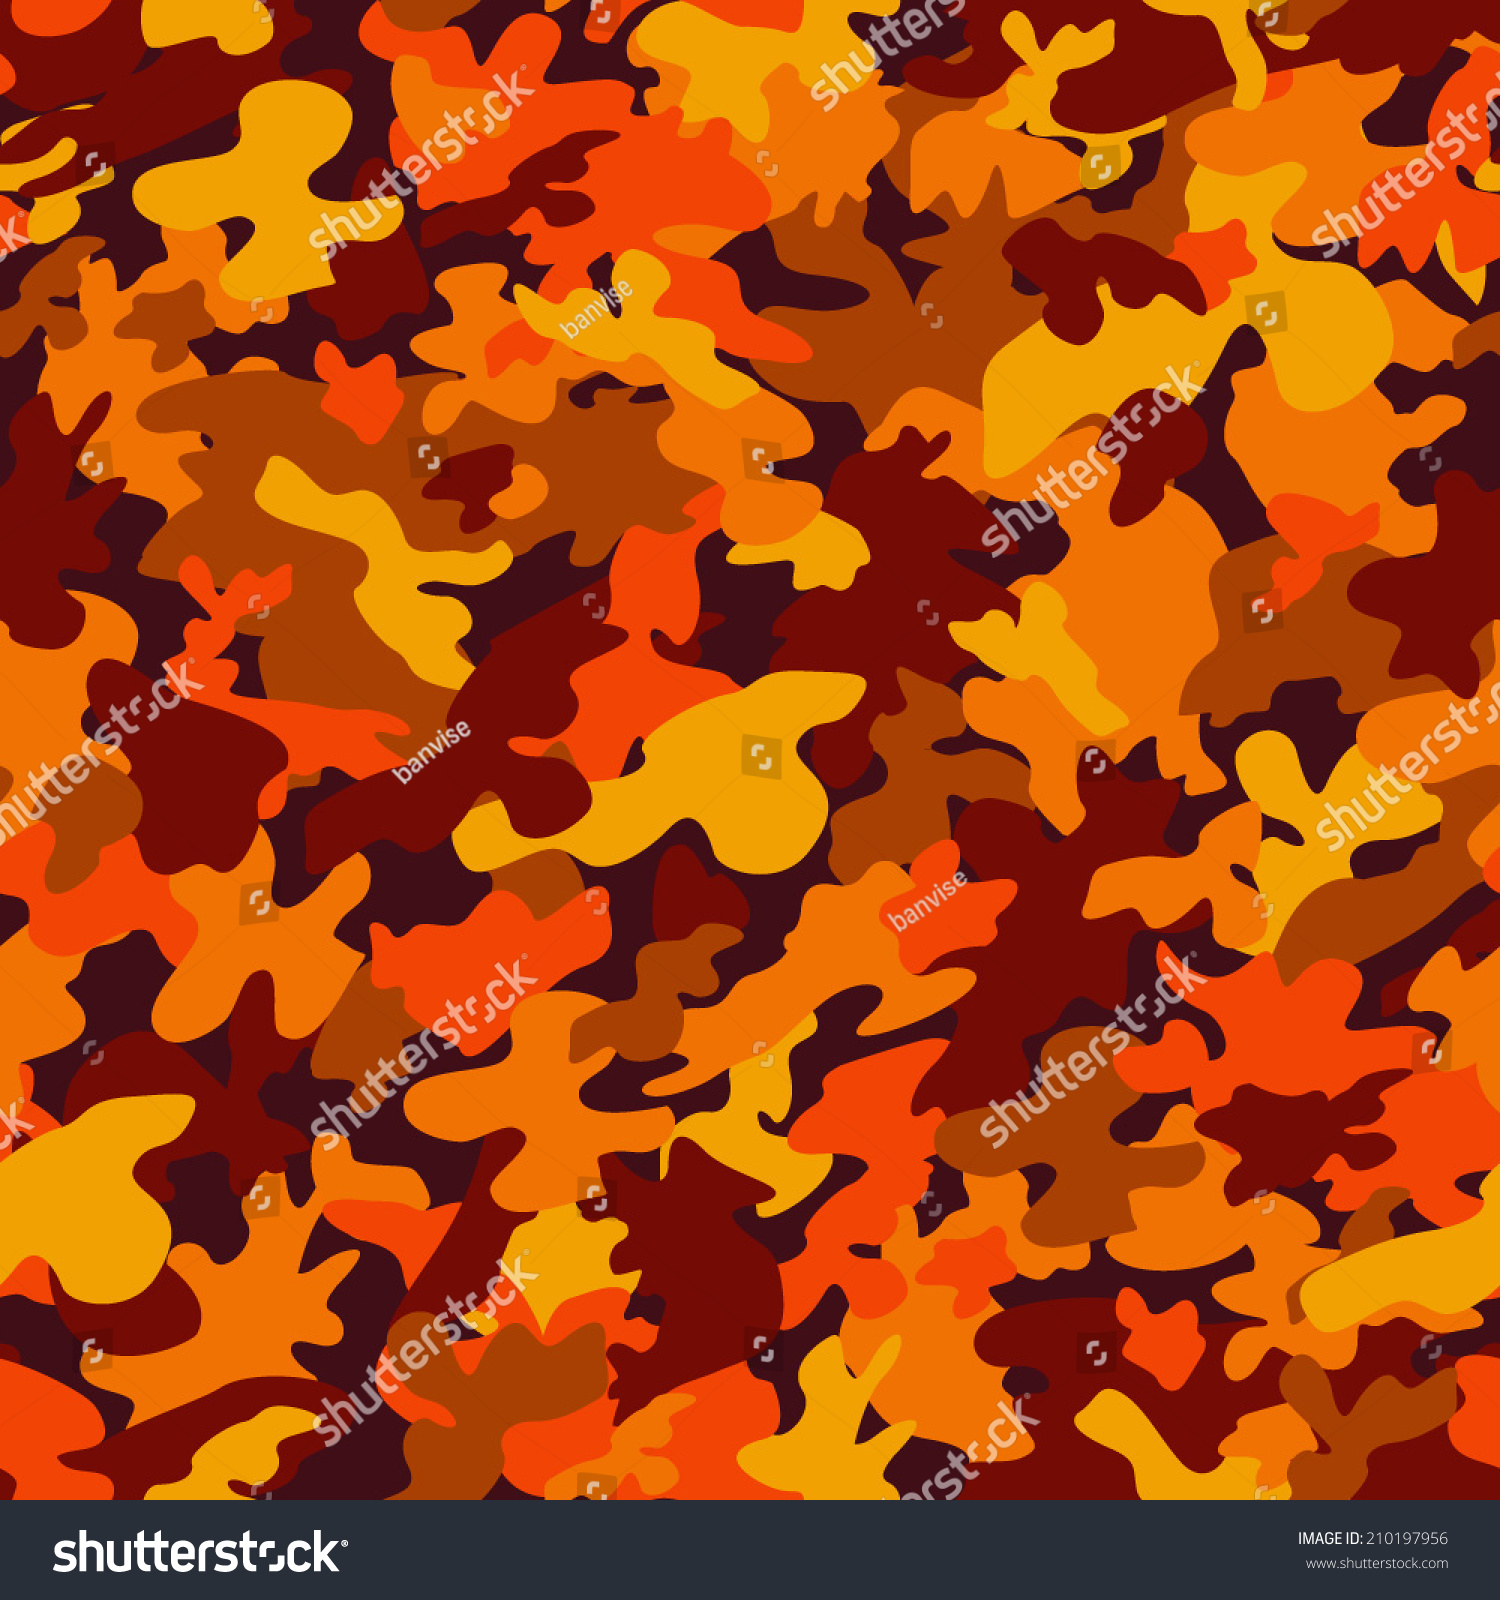 Colorful Camouflage Seamless Patterns Original Vector Stock Vector ...